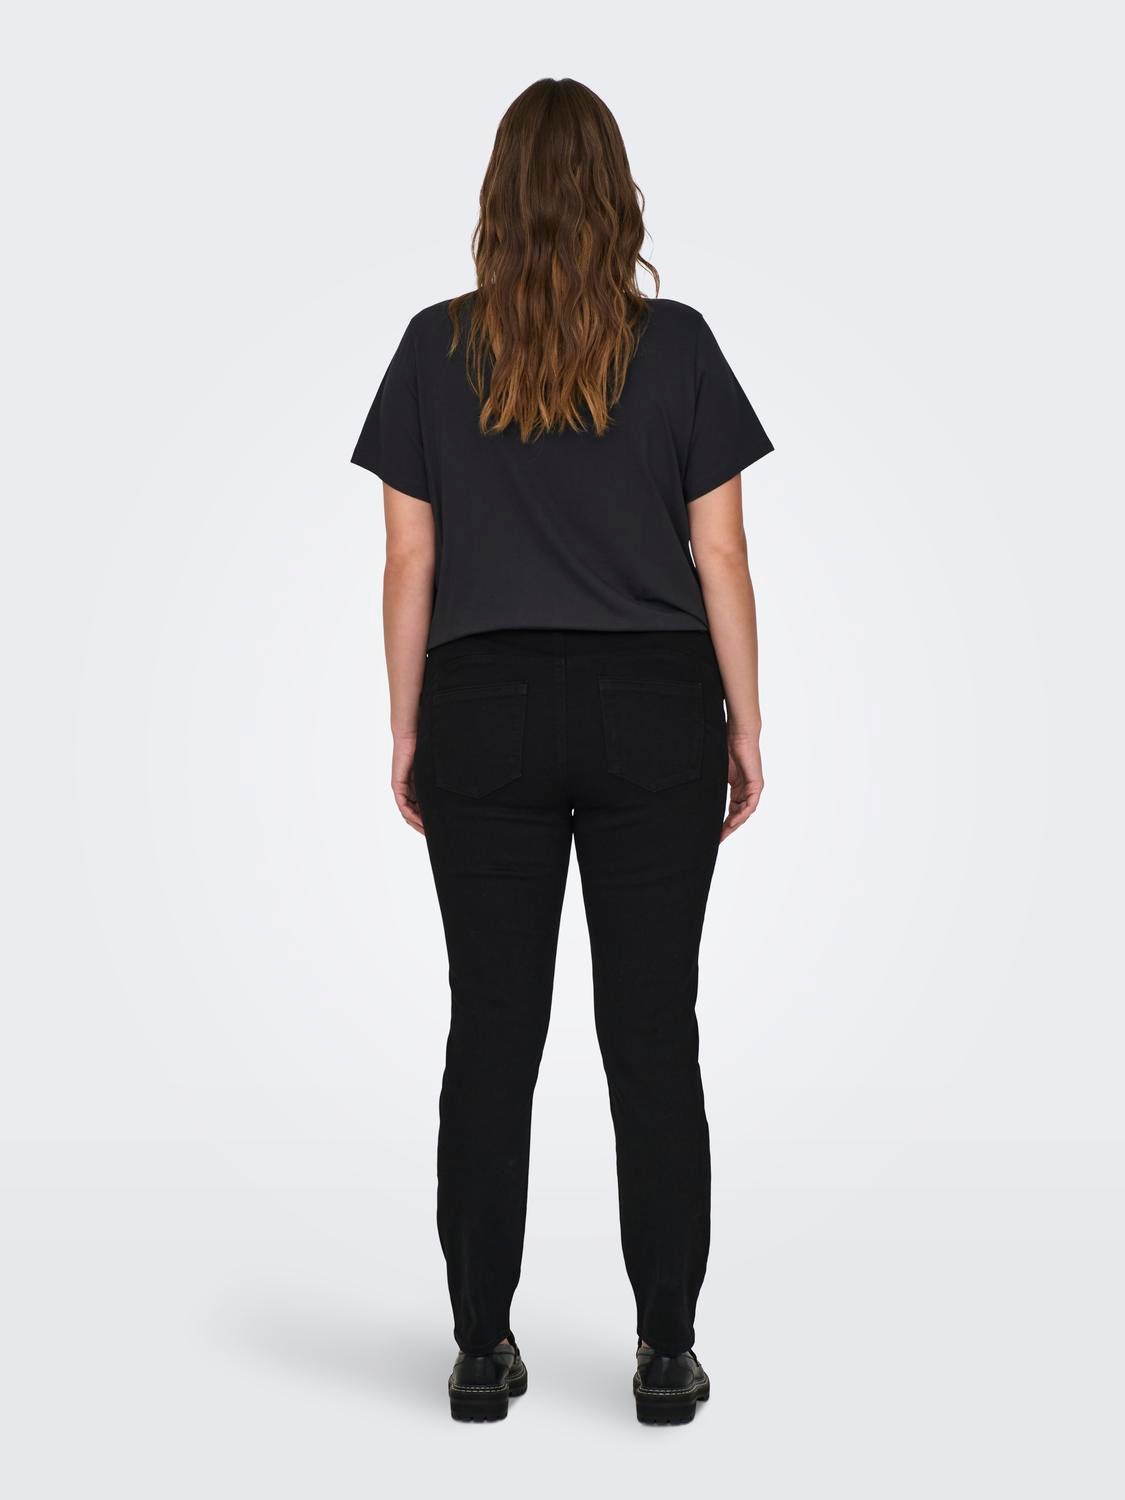 ONLY Jeans Skinny Fit Taille moyenne -Black Denim - 15300125